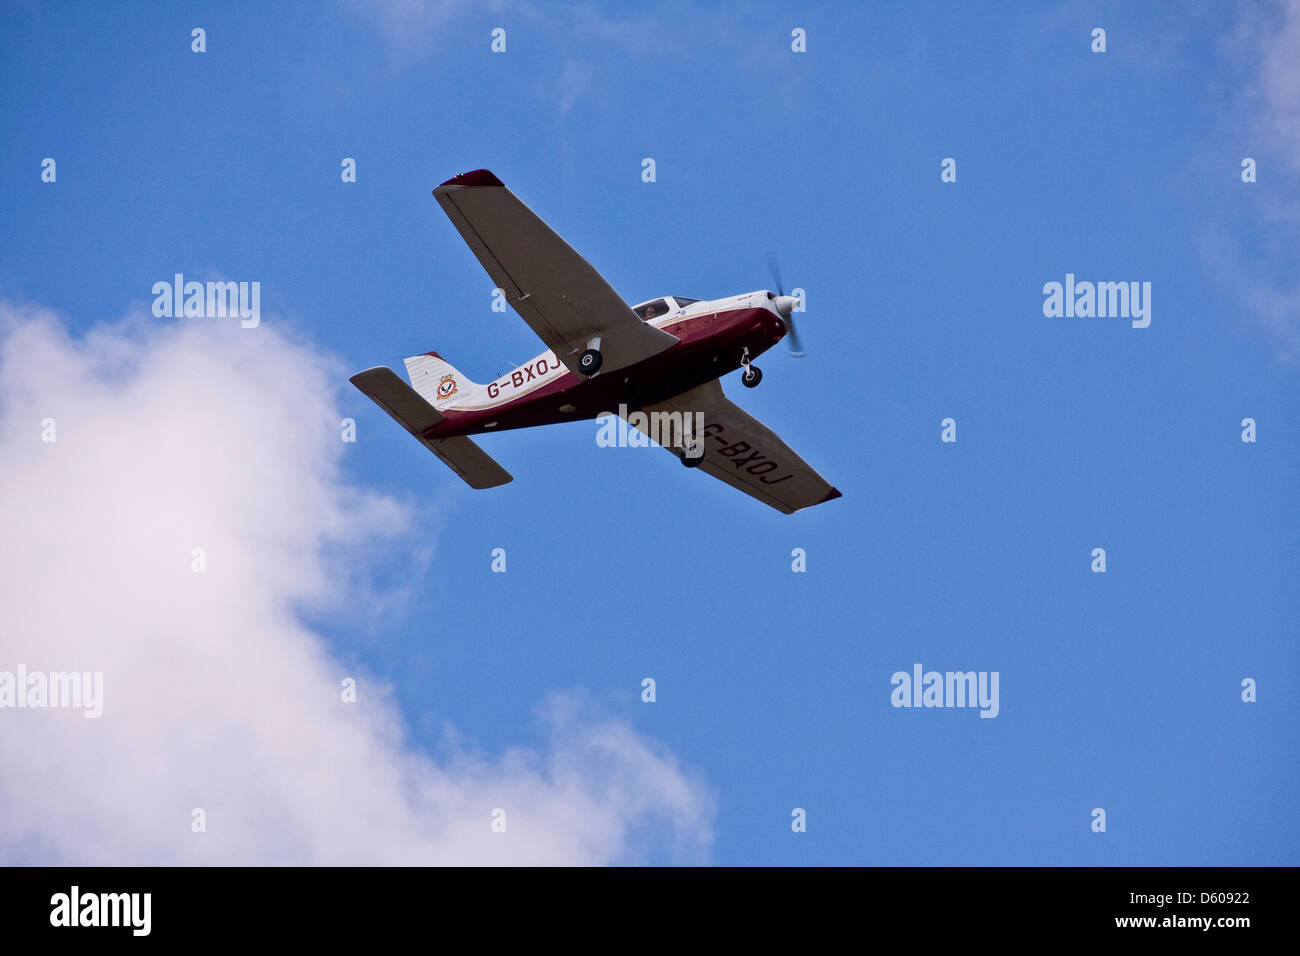 Tayside Aviation G-BXOJ Flight Training aircraft in flight after taking off from the Dundee Airport,UK Stock Photo